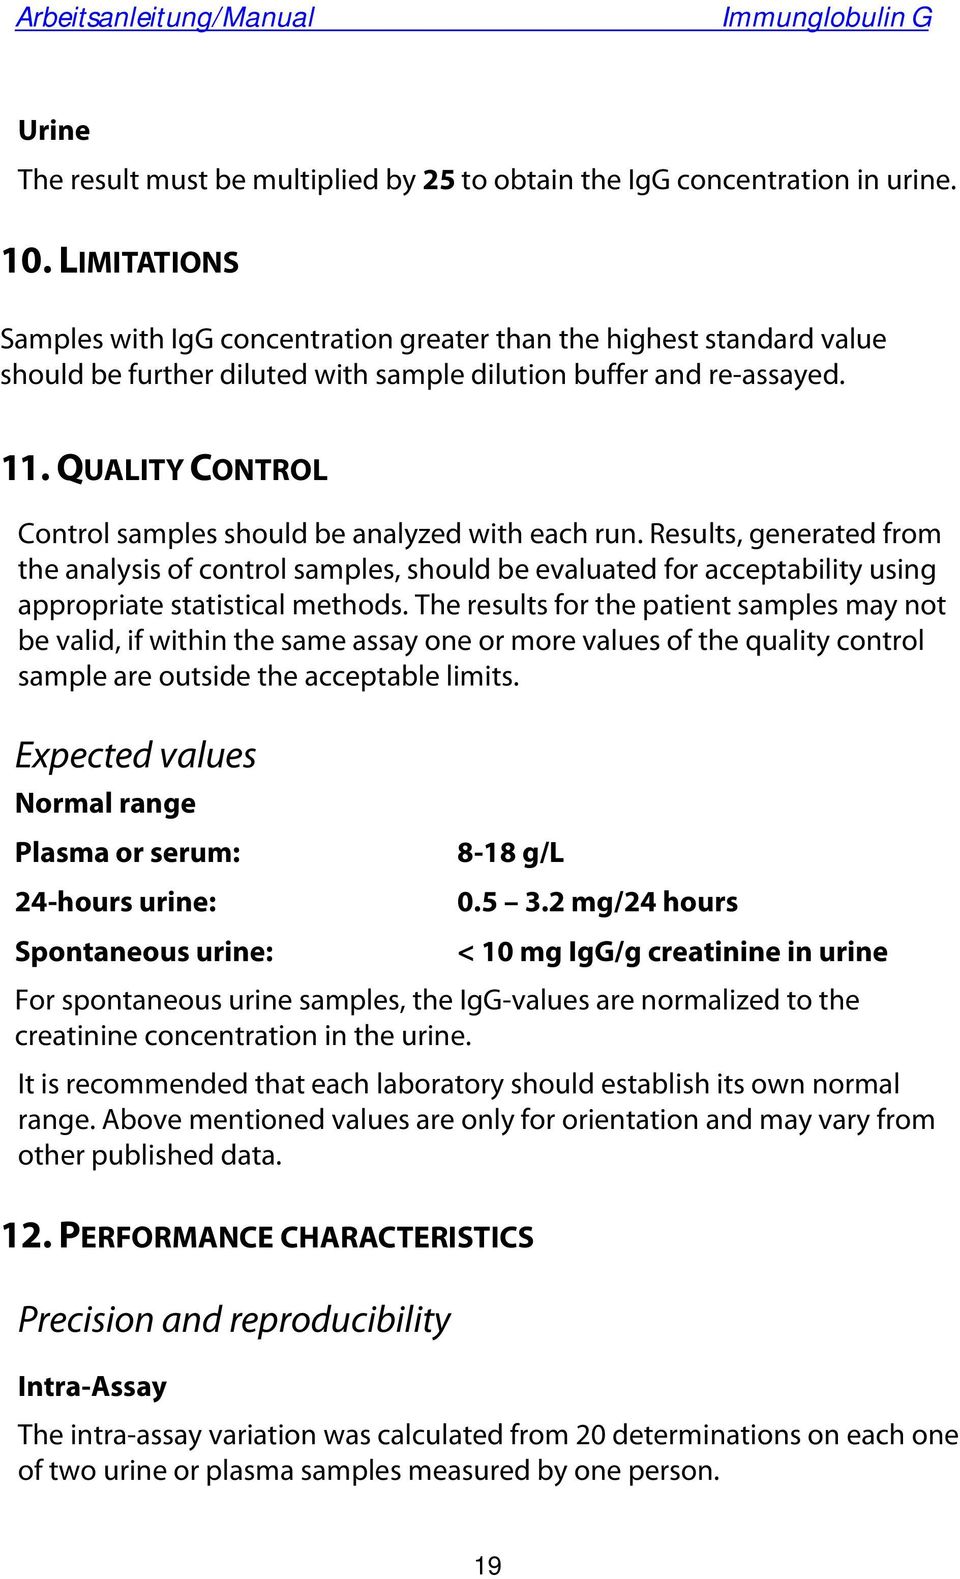 QUALITY CONTROL Control samples should be analyzed with each run. Results, generated from the analysis of control samples, should be evaluated for acceptability using appropriate statistical methods.